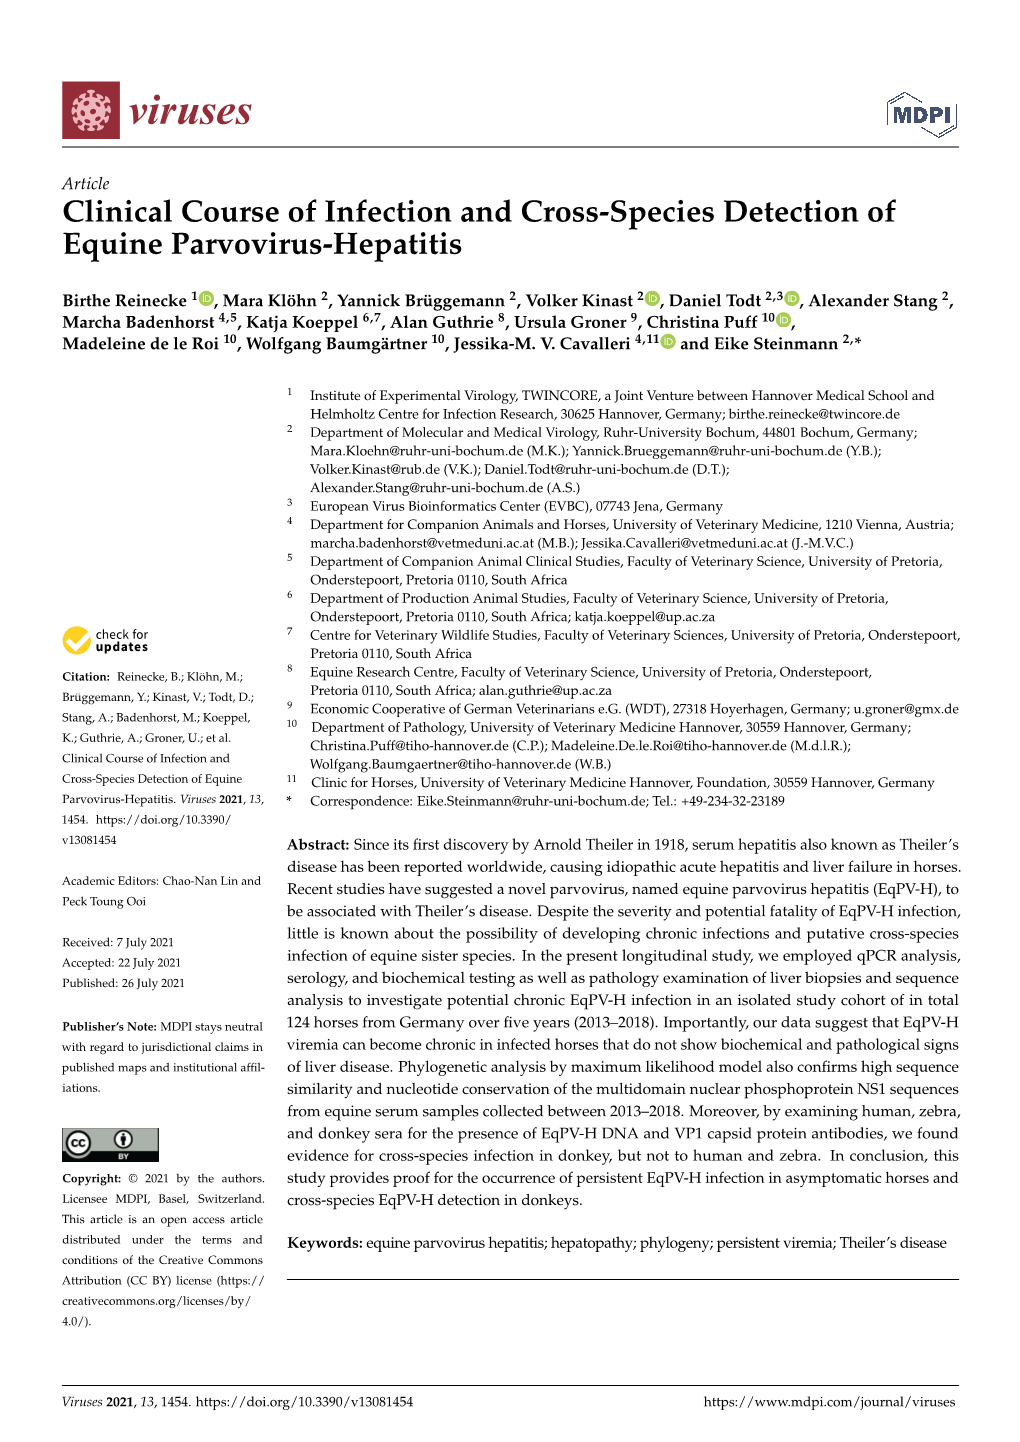 Clinical Course of Infection and Cross-Species Detection of Equine Parvovirus-Hepatitis